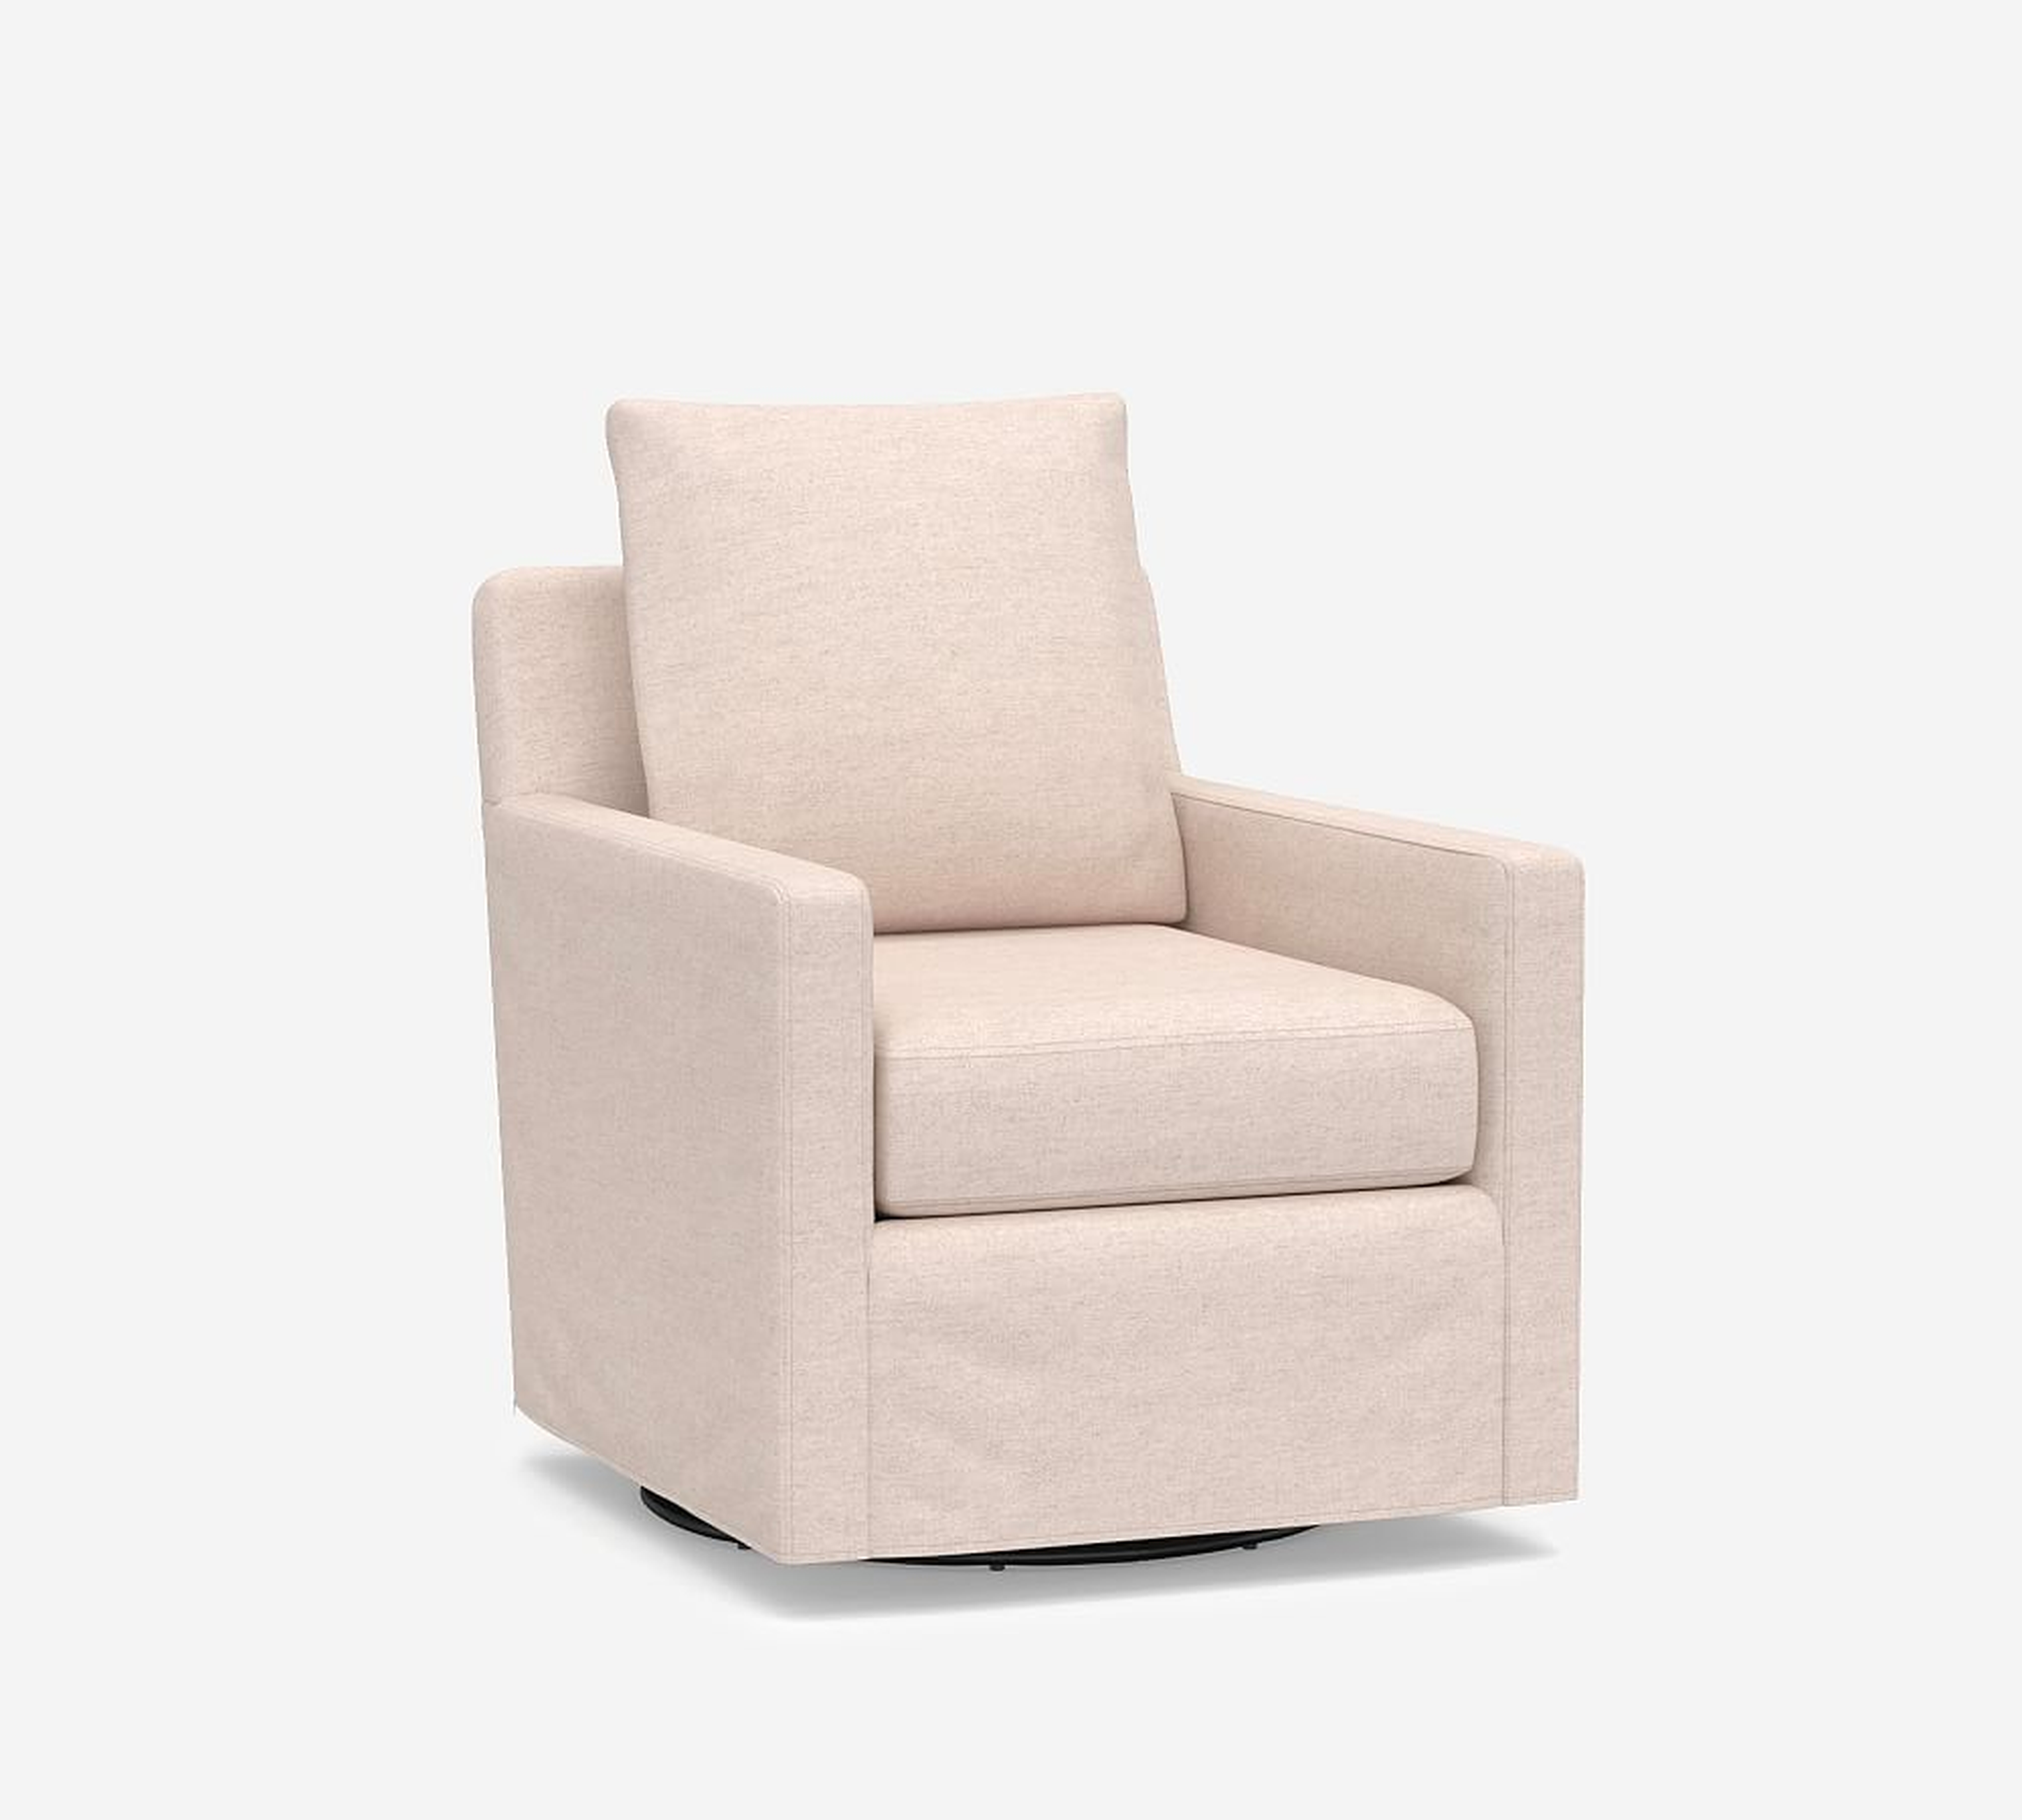 Ayden Slipcovered Swivel Glider, Polyester Wrapped Cushions, Park Weave Ivory - Pottery Barn